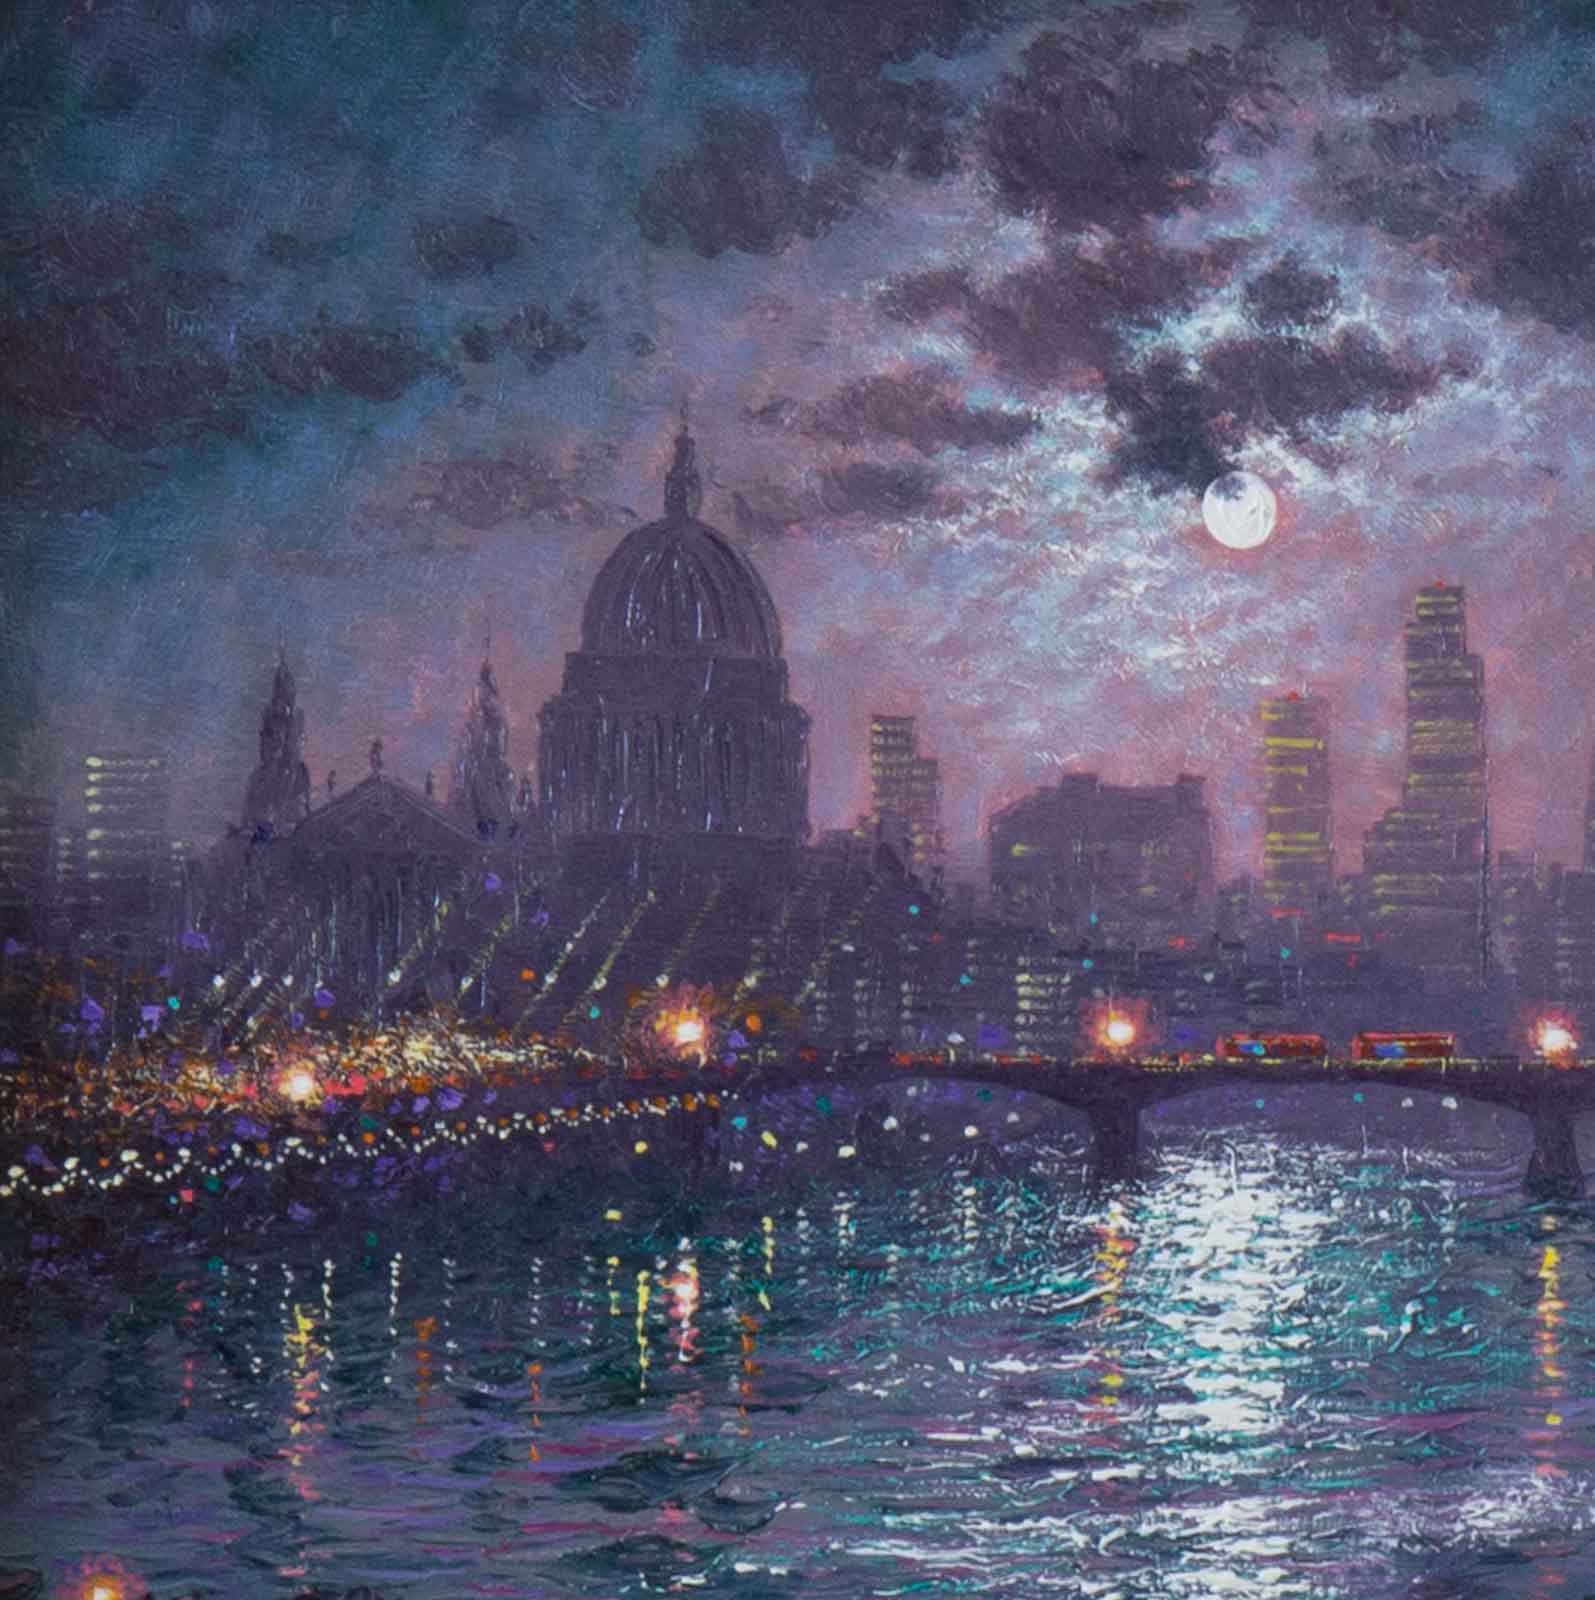 The Thames By Moonlight